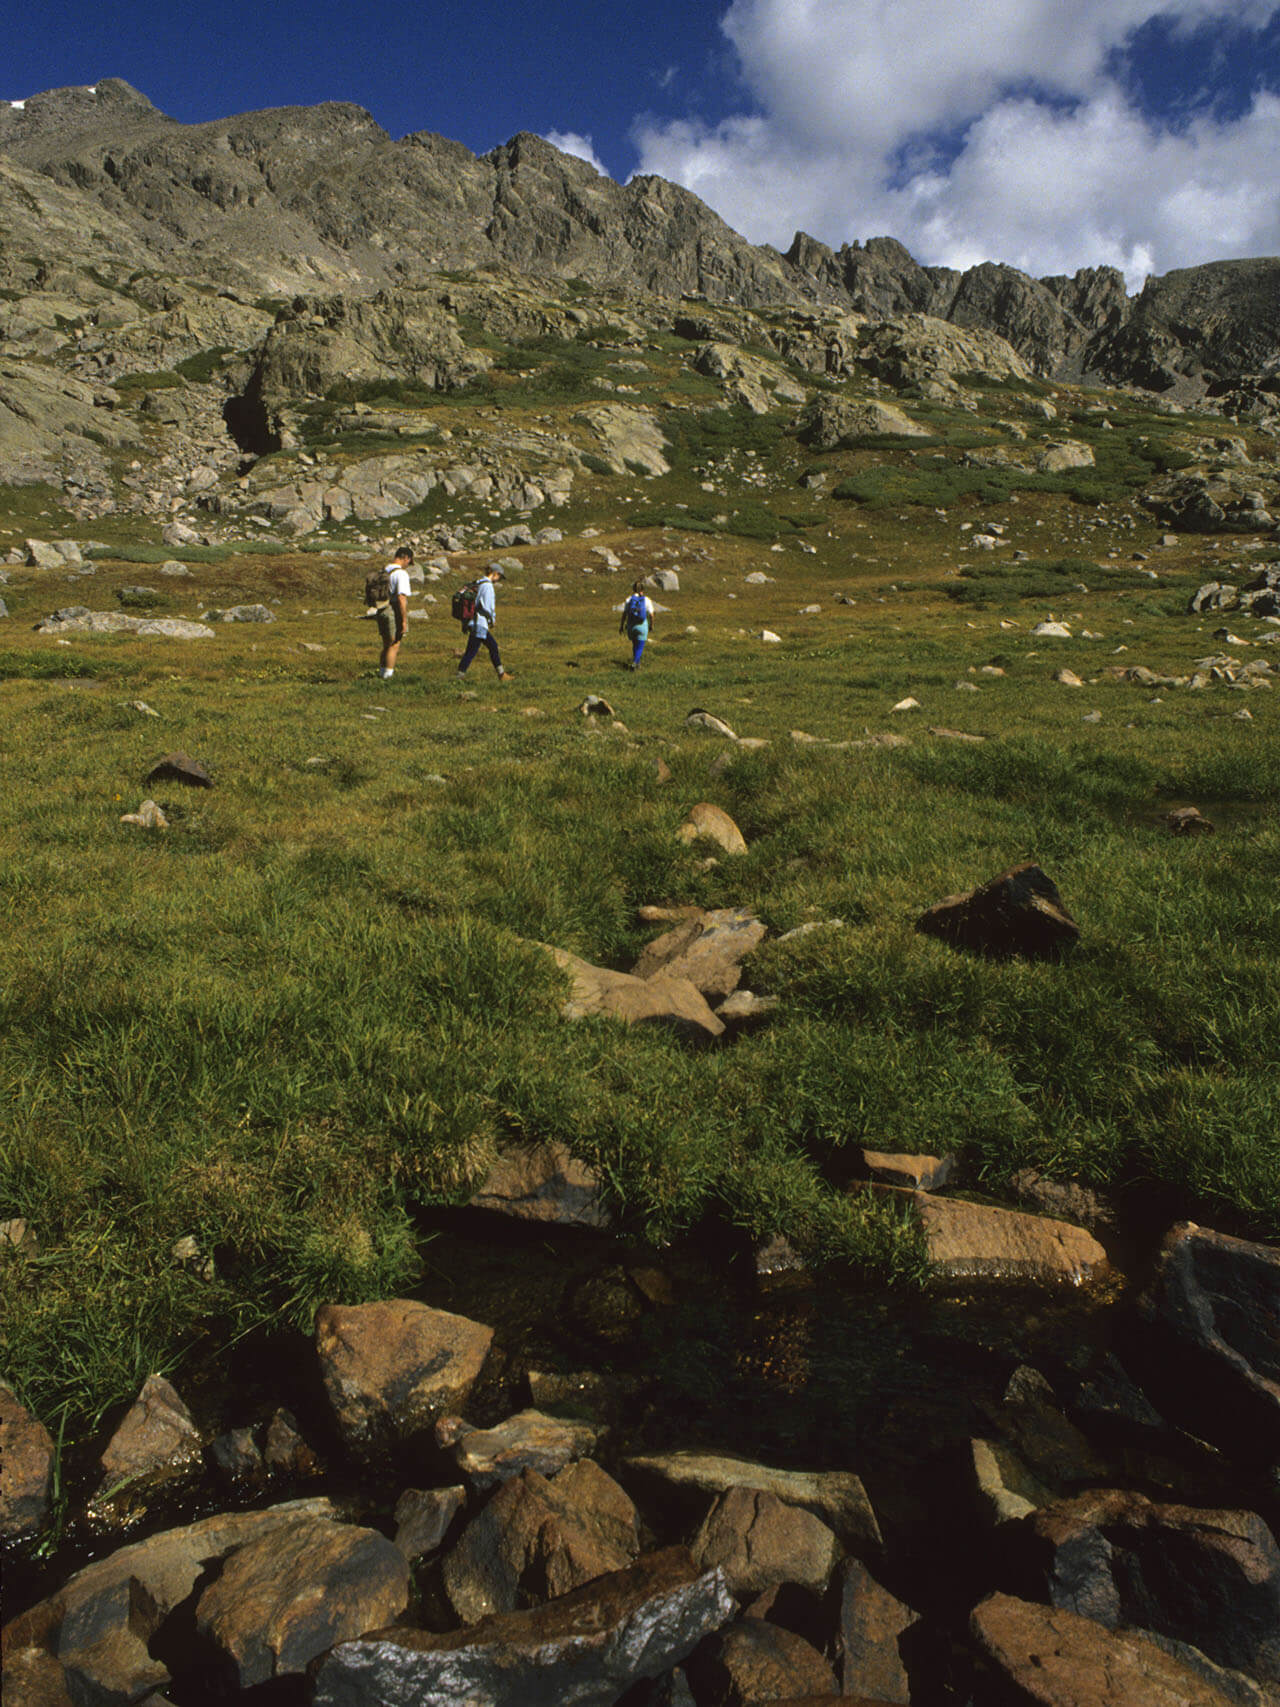 Three hikers on alpine tundra with craggy peaks in the background.